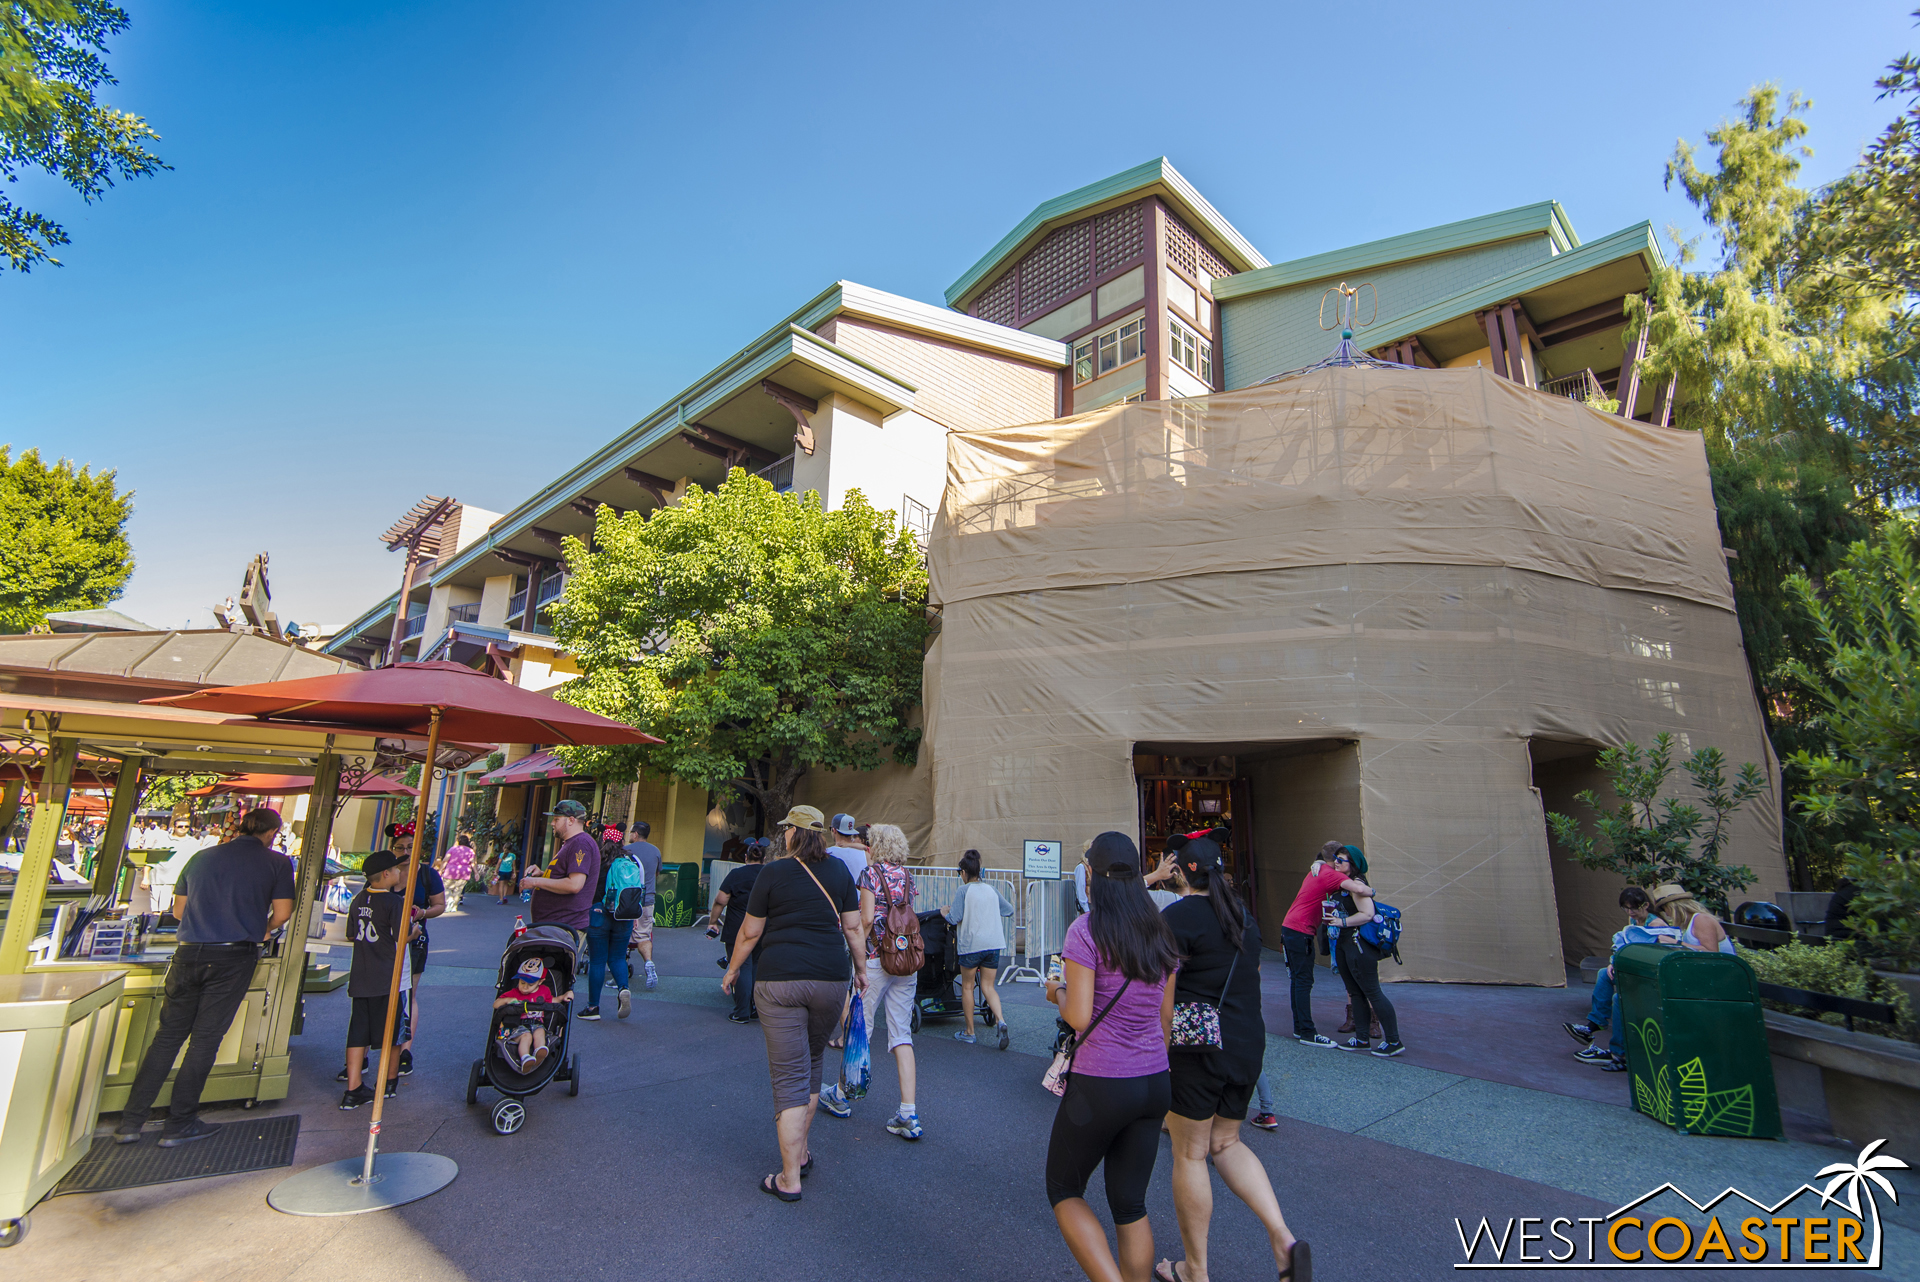  The World of Disney west entrance is under regular maintenance, but guests can still come in through here while building work proceeds. 